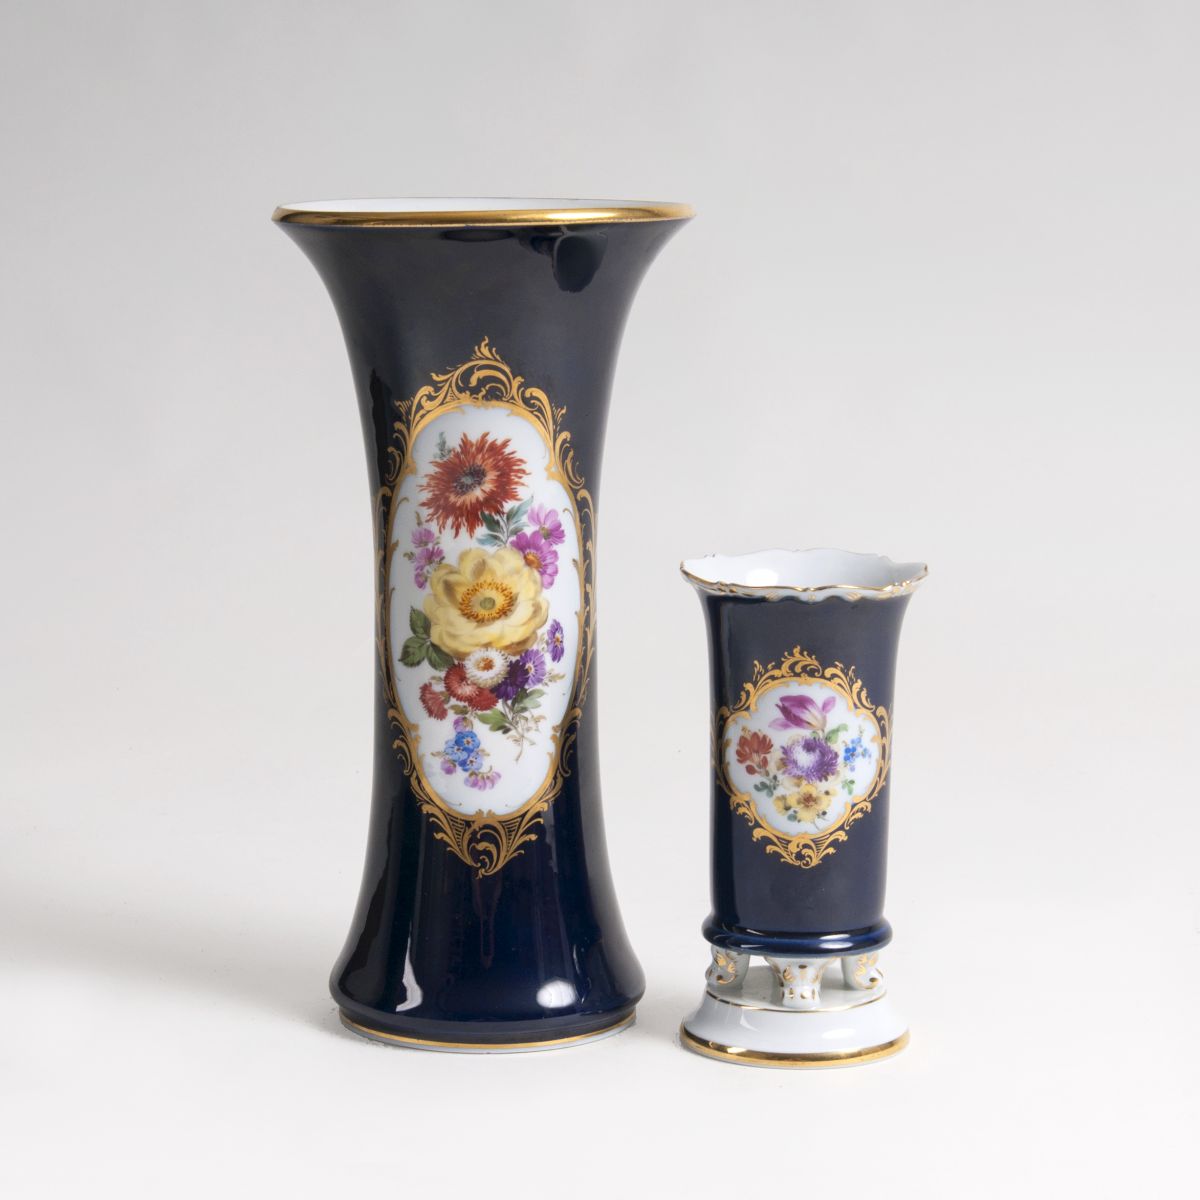 Two cobalt blue Porcelain Vases with Flower Painting